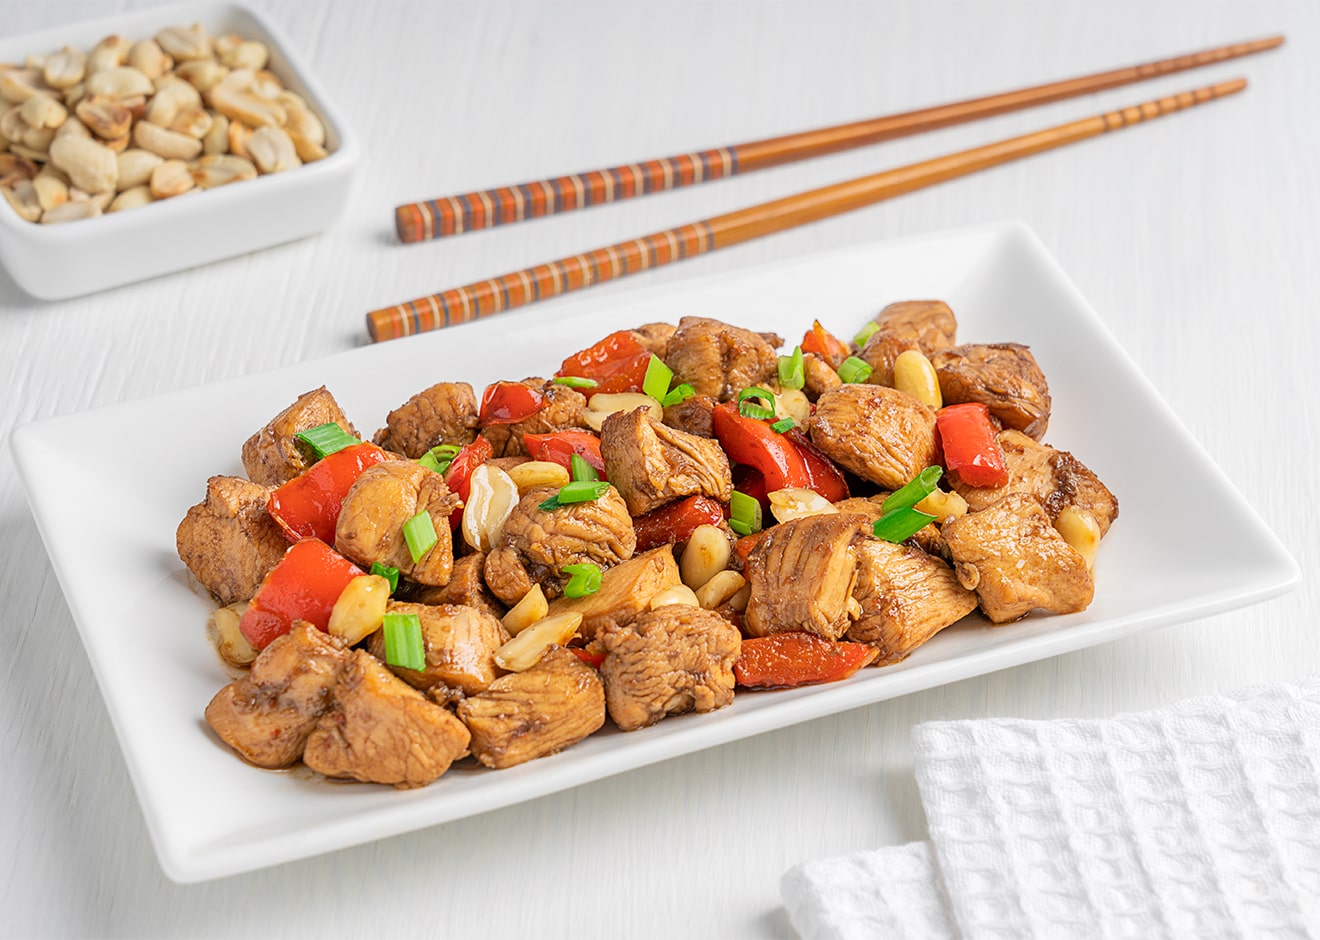 kung pao chicken in the plate